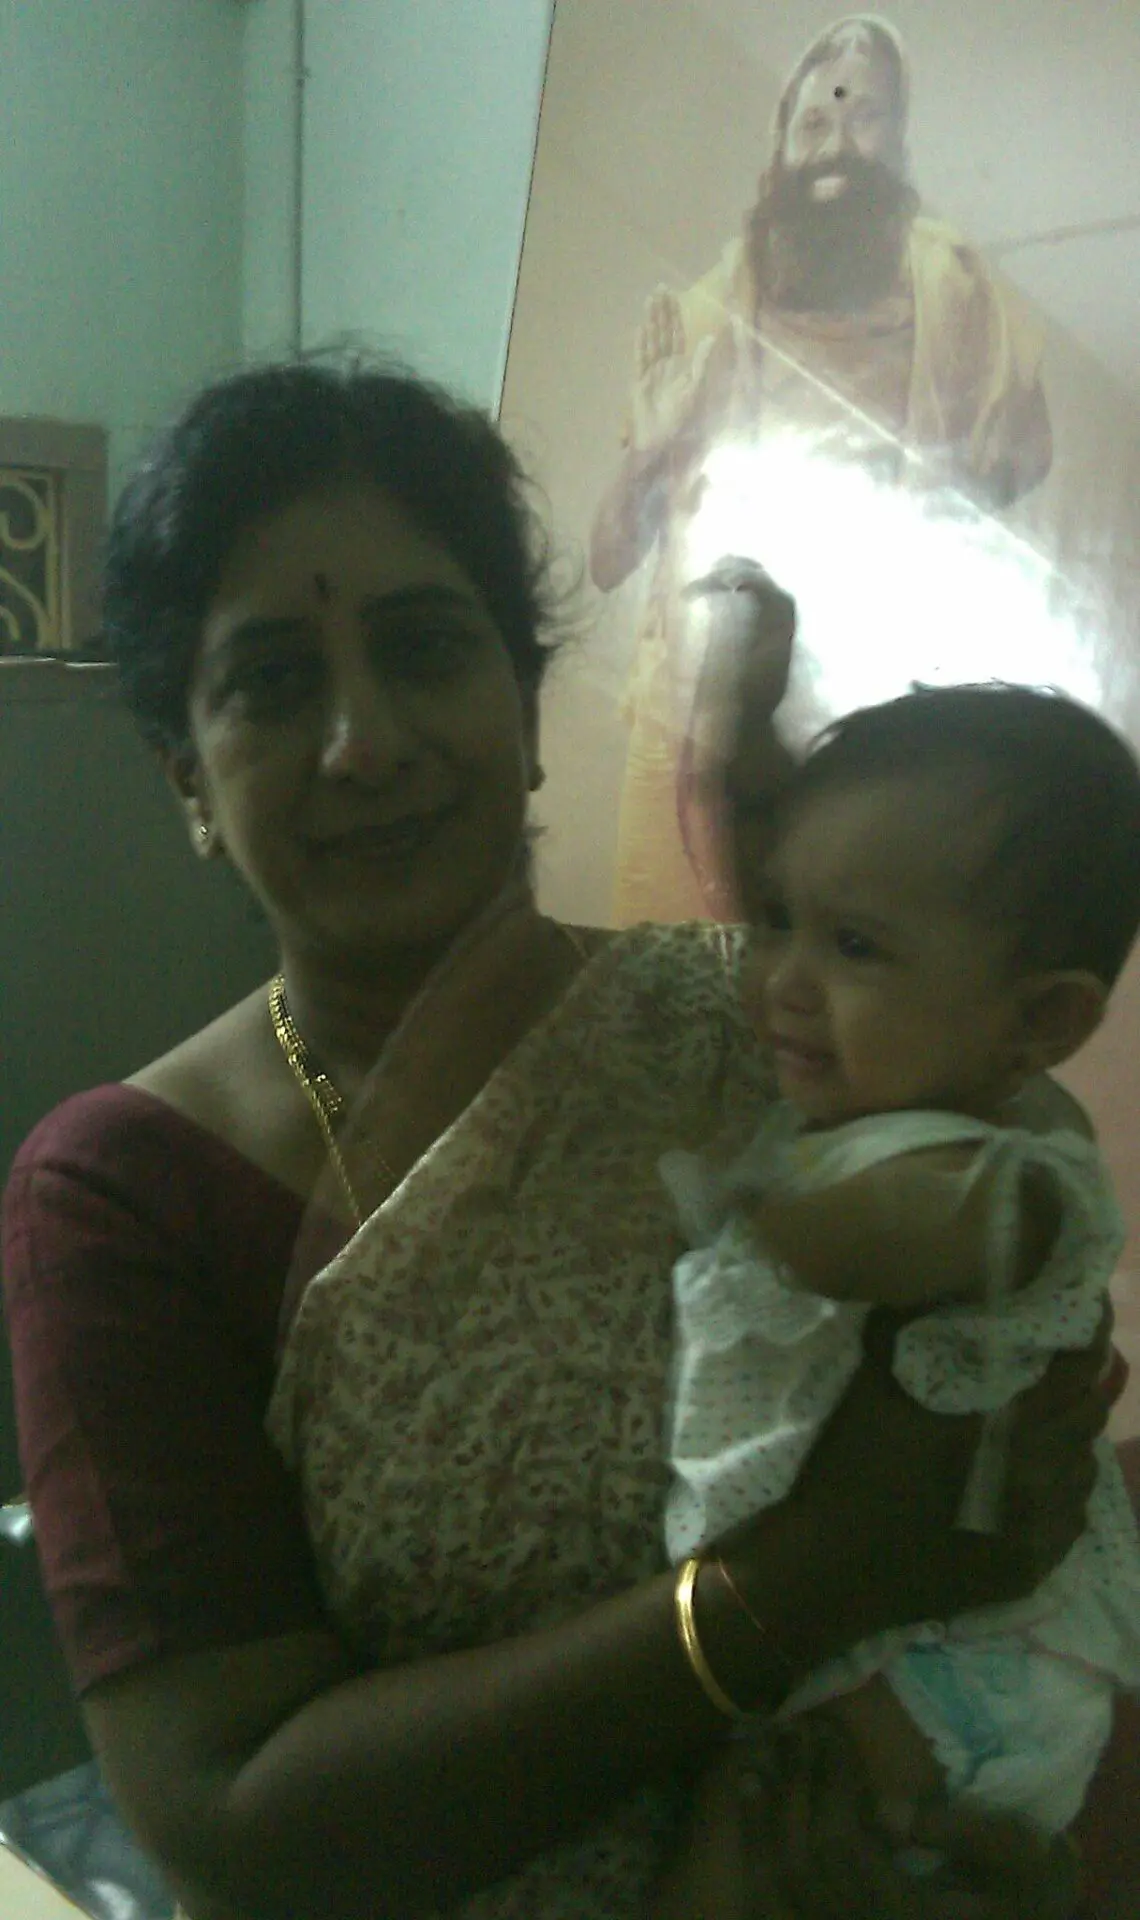 Dr. Rama Devi Kolli standing and holding a baby in her arms. The baby was born to an NRI couple from UK, after IVF treatment at Karthika Datta's IVF clinic in 2010.